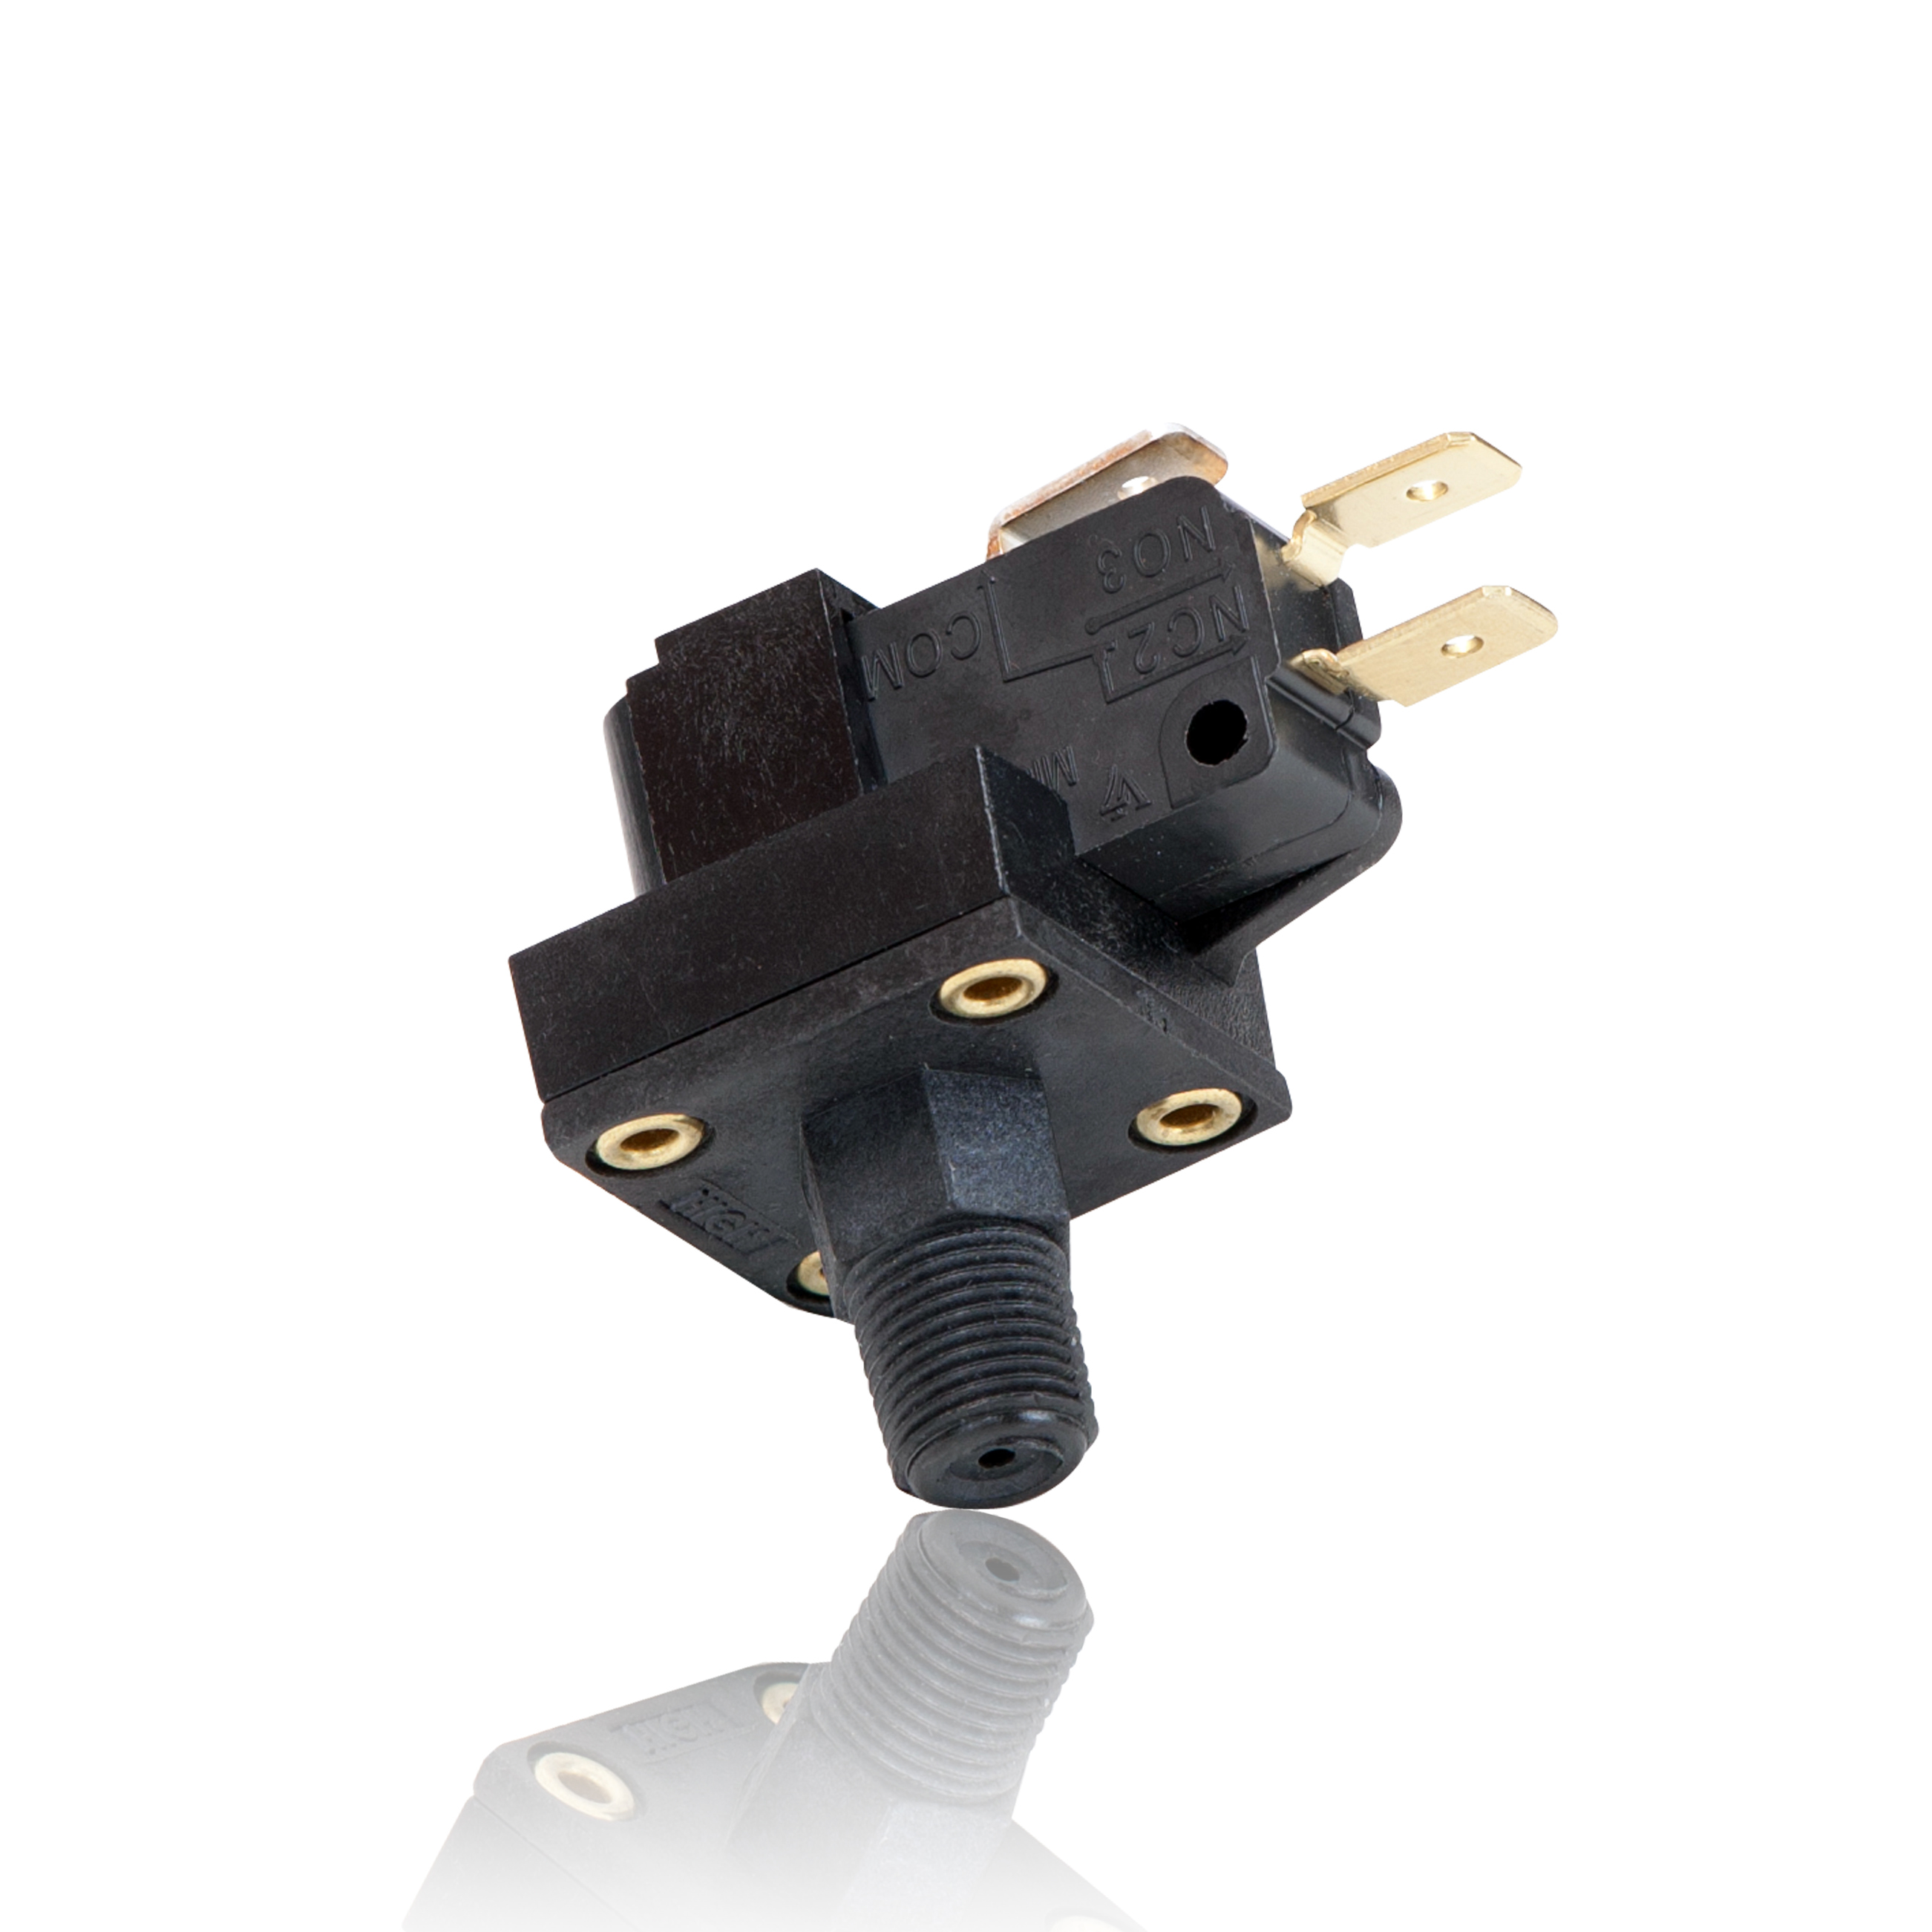 DesignFlex PSF103 High Current Pressure Switch by World Magnetics. UL, RoHS, Made in USA.